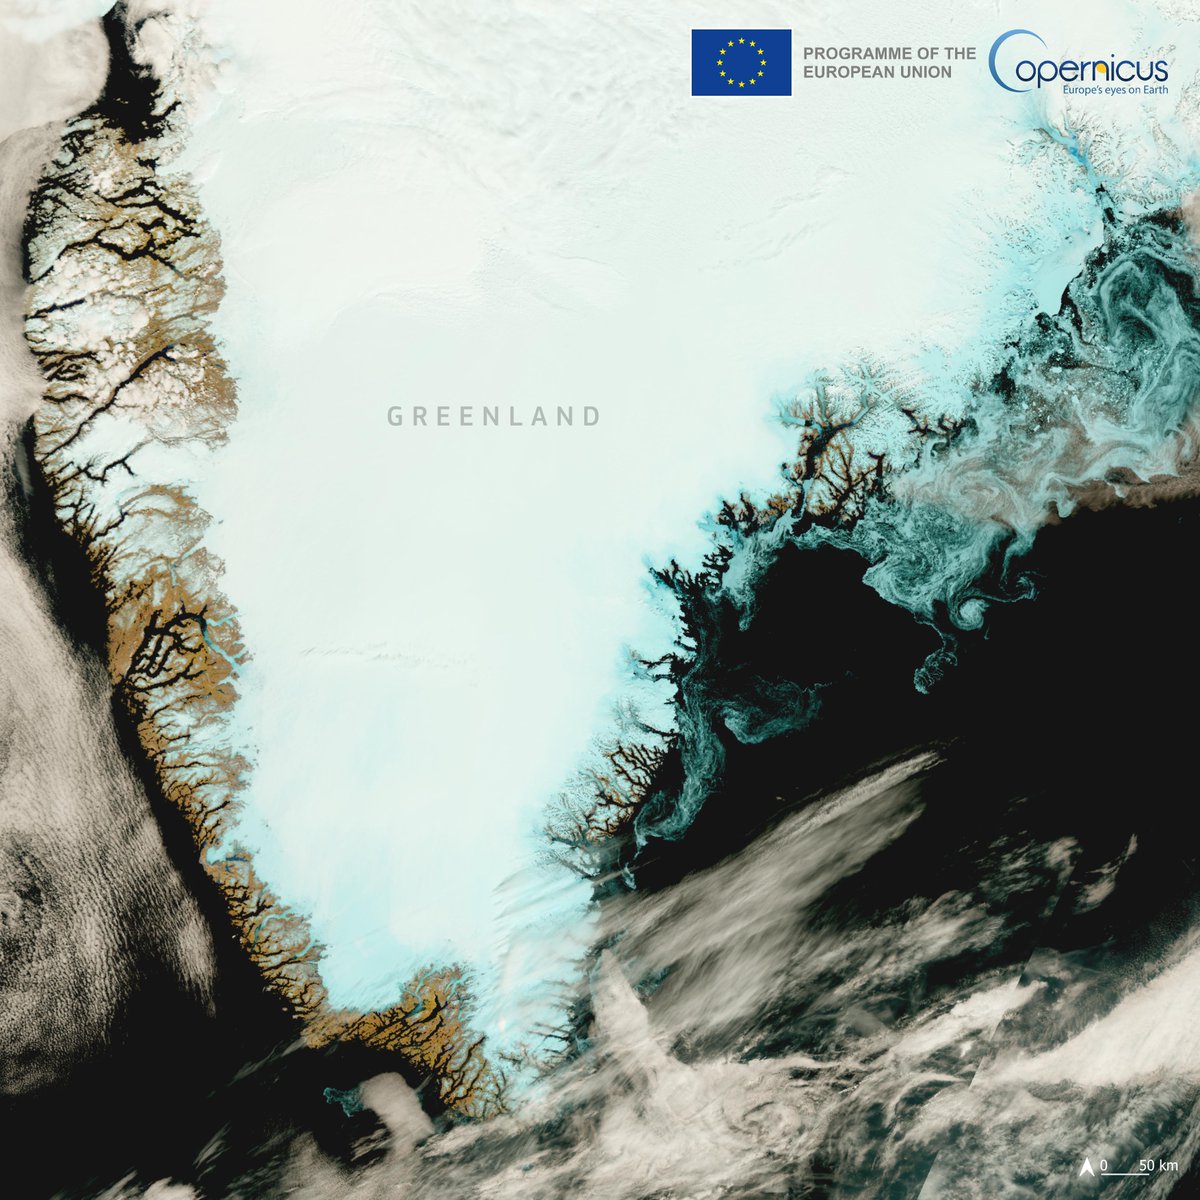 Happy #Ullortuneq (also known as National Day) to all our friends, followers and colleagues in/from #Greenland 🇬🇱

DYK it coincides with the summer solstice🌞❓

We join the celebrations with this image acquired by #Copernicus #Sentinel3 🇪🇺🛰️ on 17 June